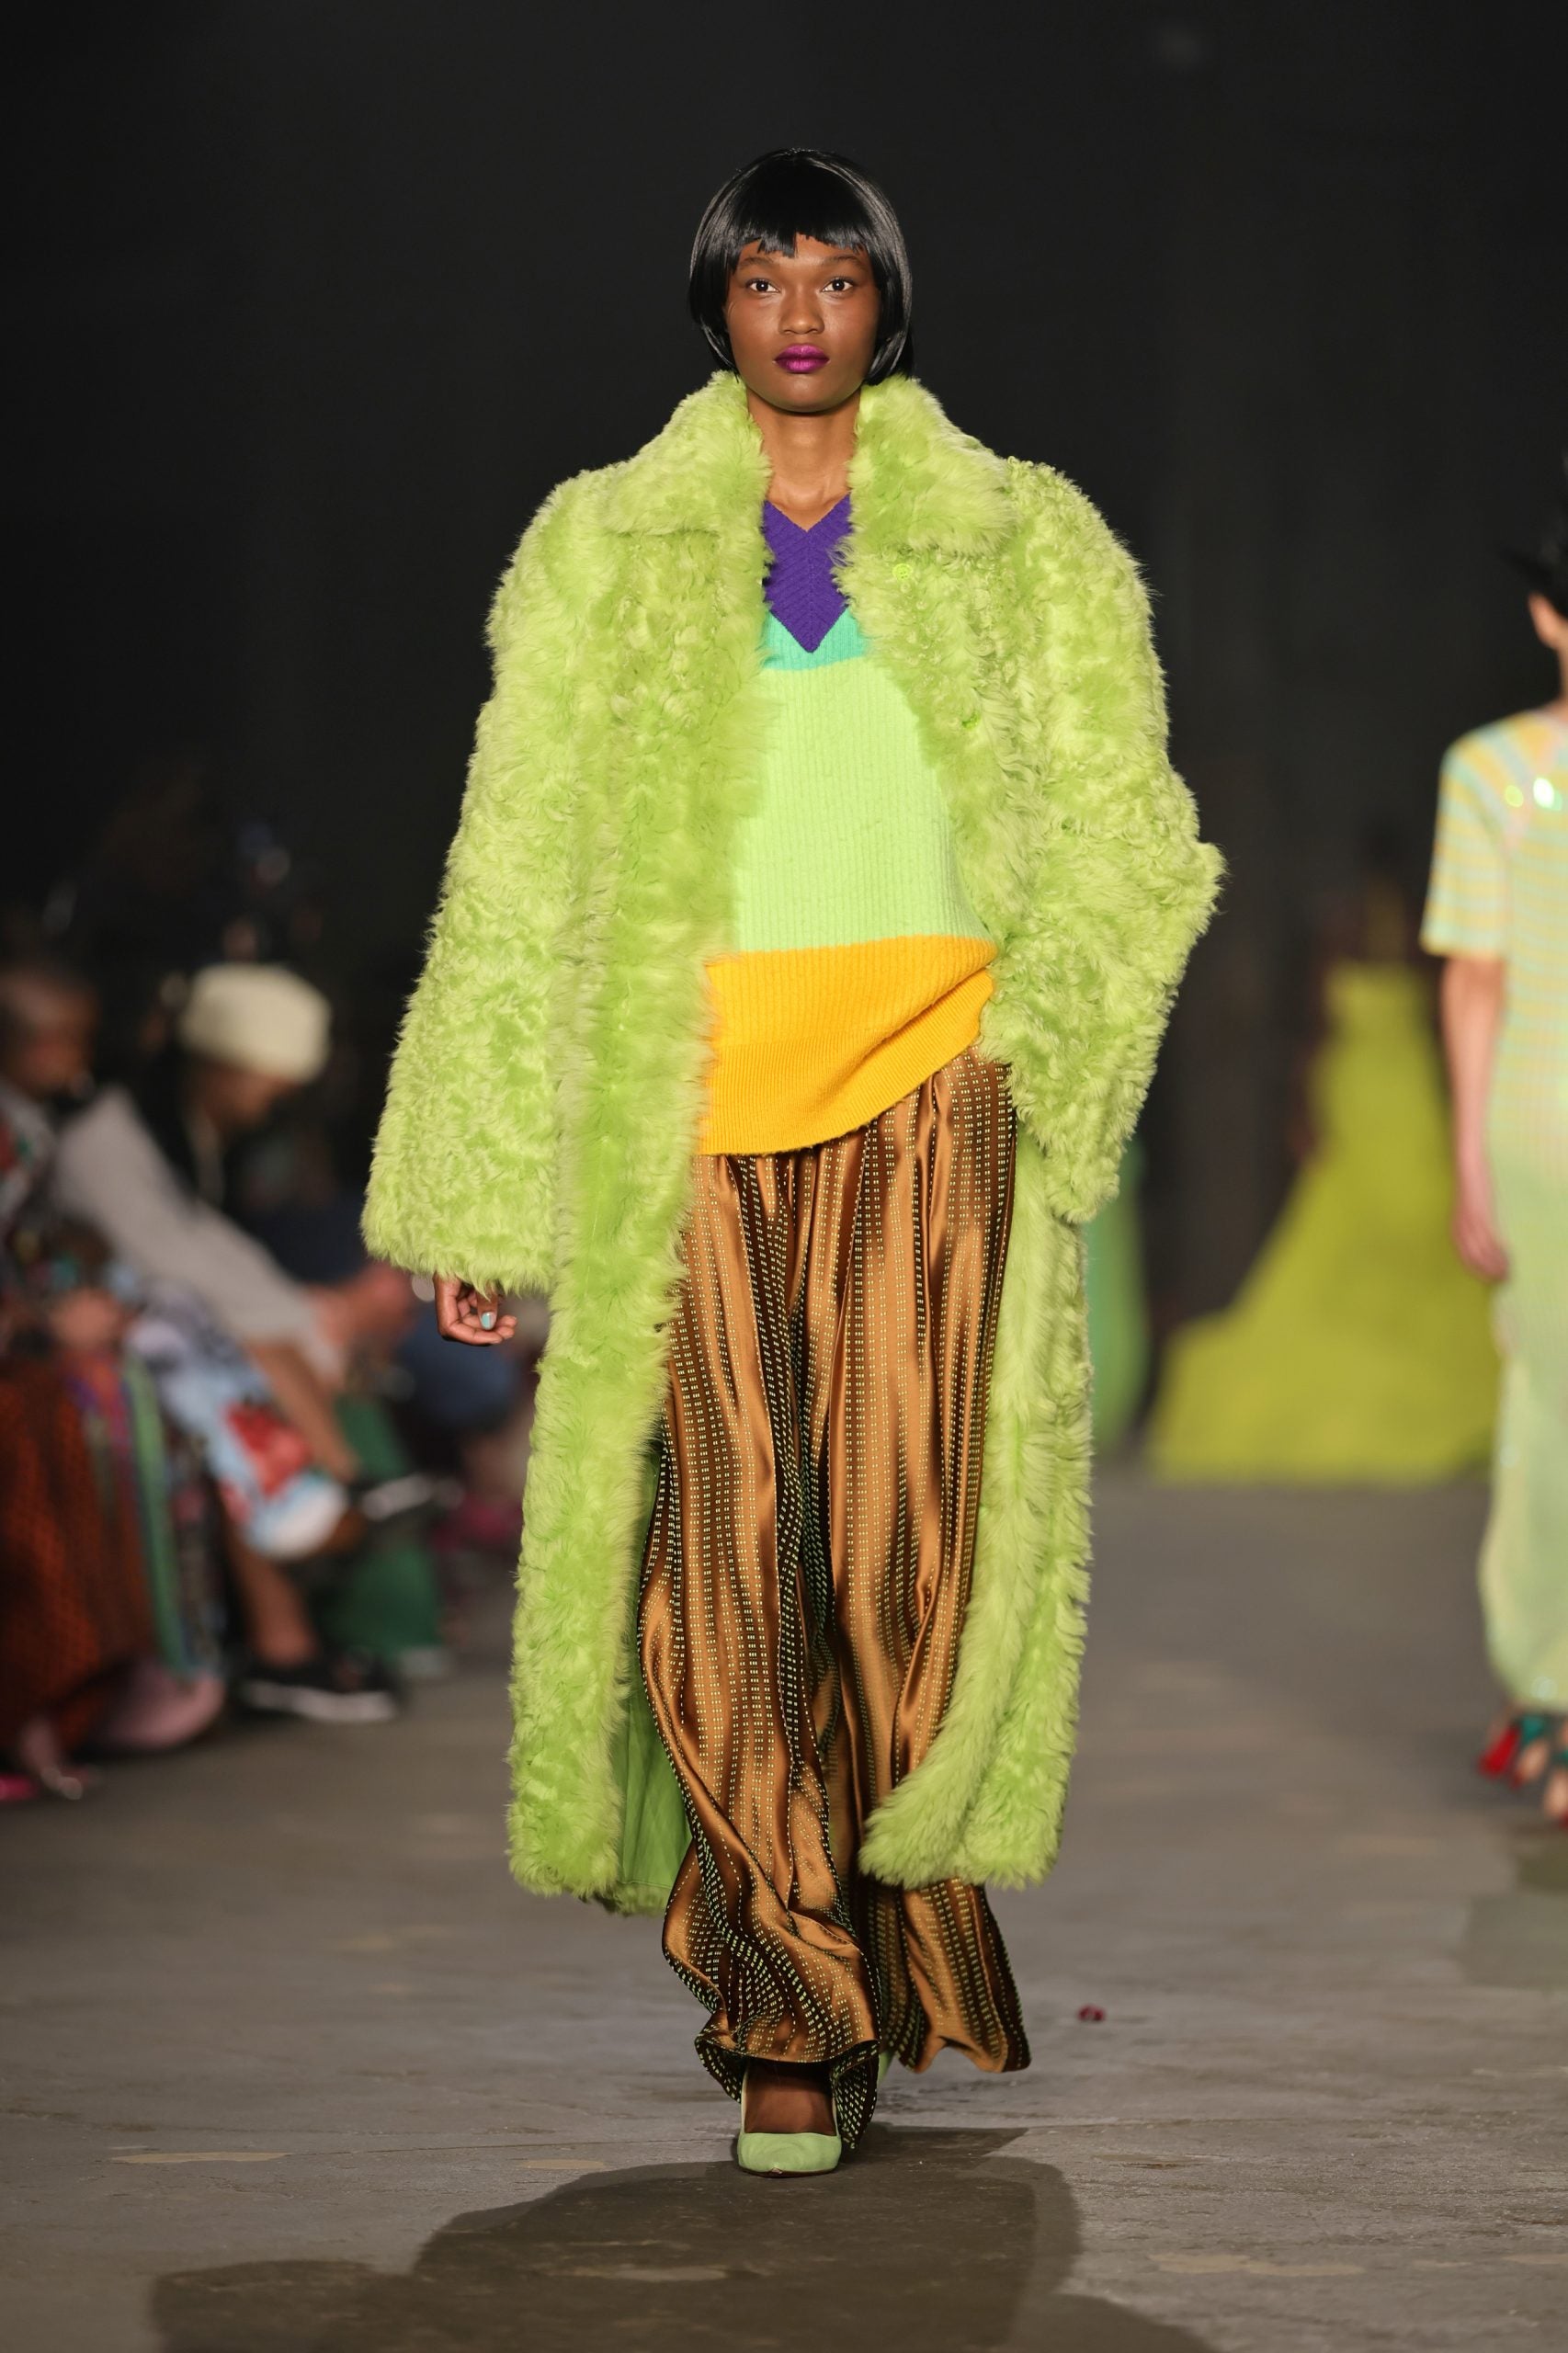 Let's Chat The Masterpiece That Was The Christopher John Rogers 2023 Resort Showcase